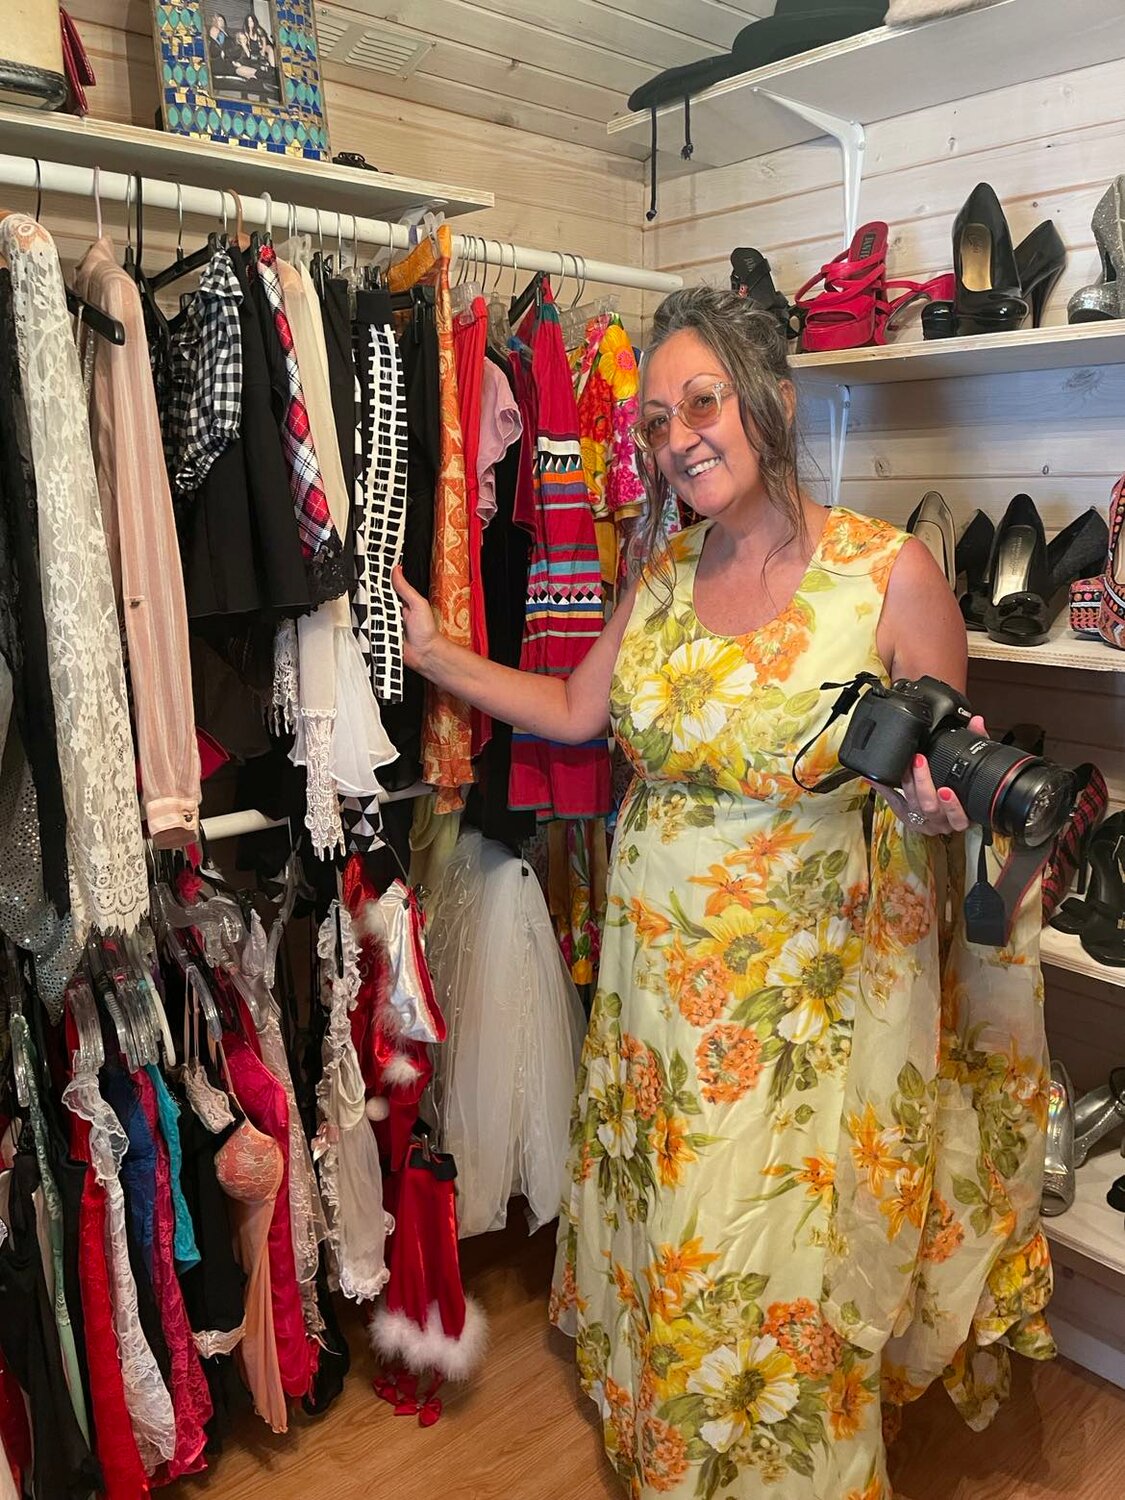 Wolfrum in the wardrobe building of Goddess Studio with her camera explaining the many clothing options women can choose to be photographed in to bring out their inner goddess.